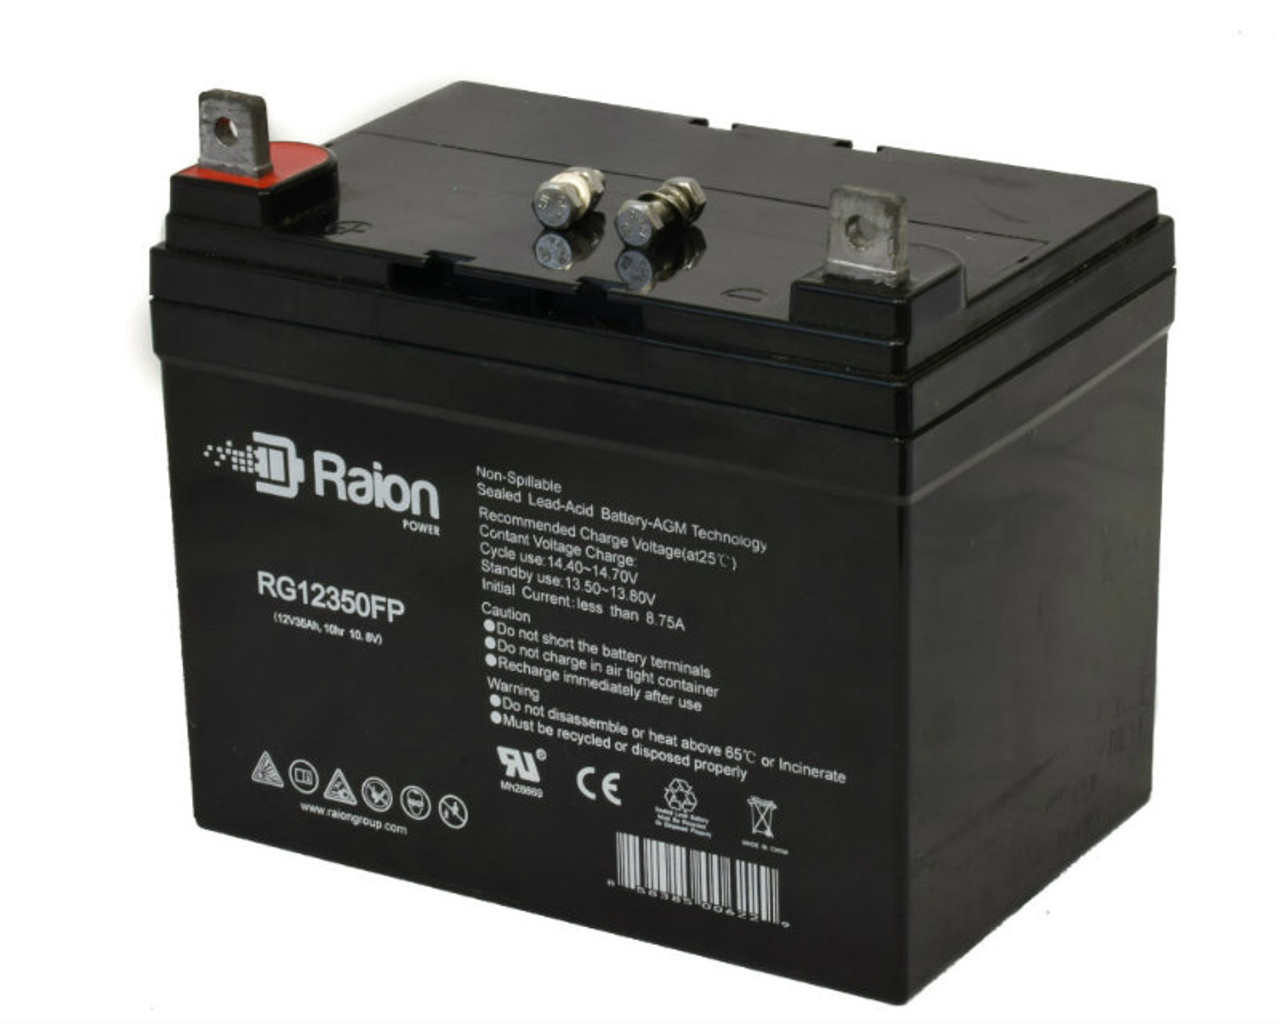 Raion Power Replacement 12V 35Ah RG12350FP Battery for LONG U1-34HE